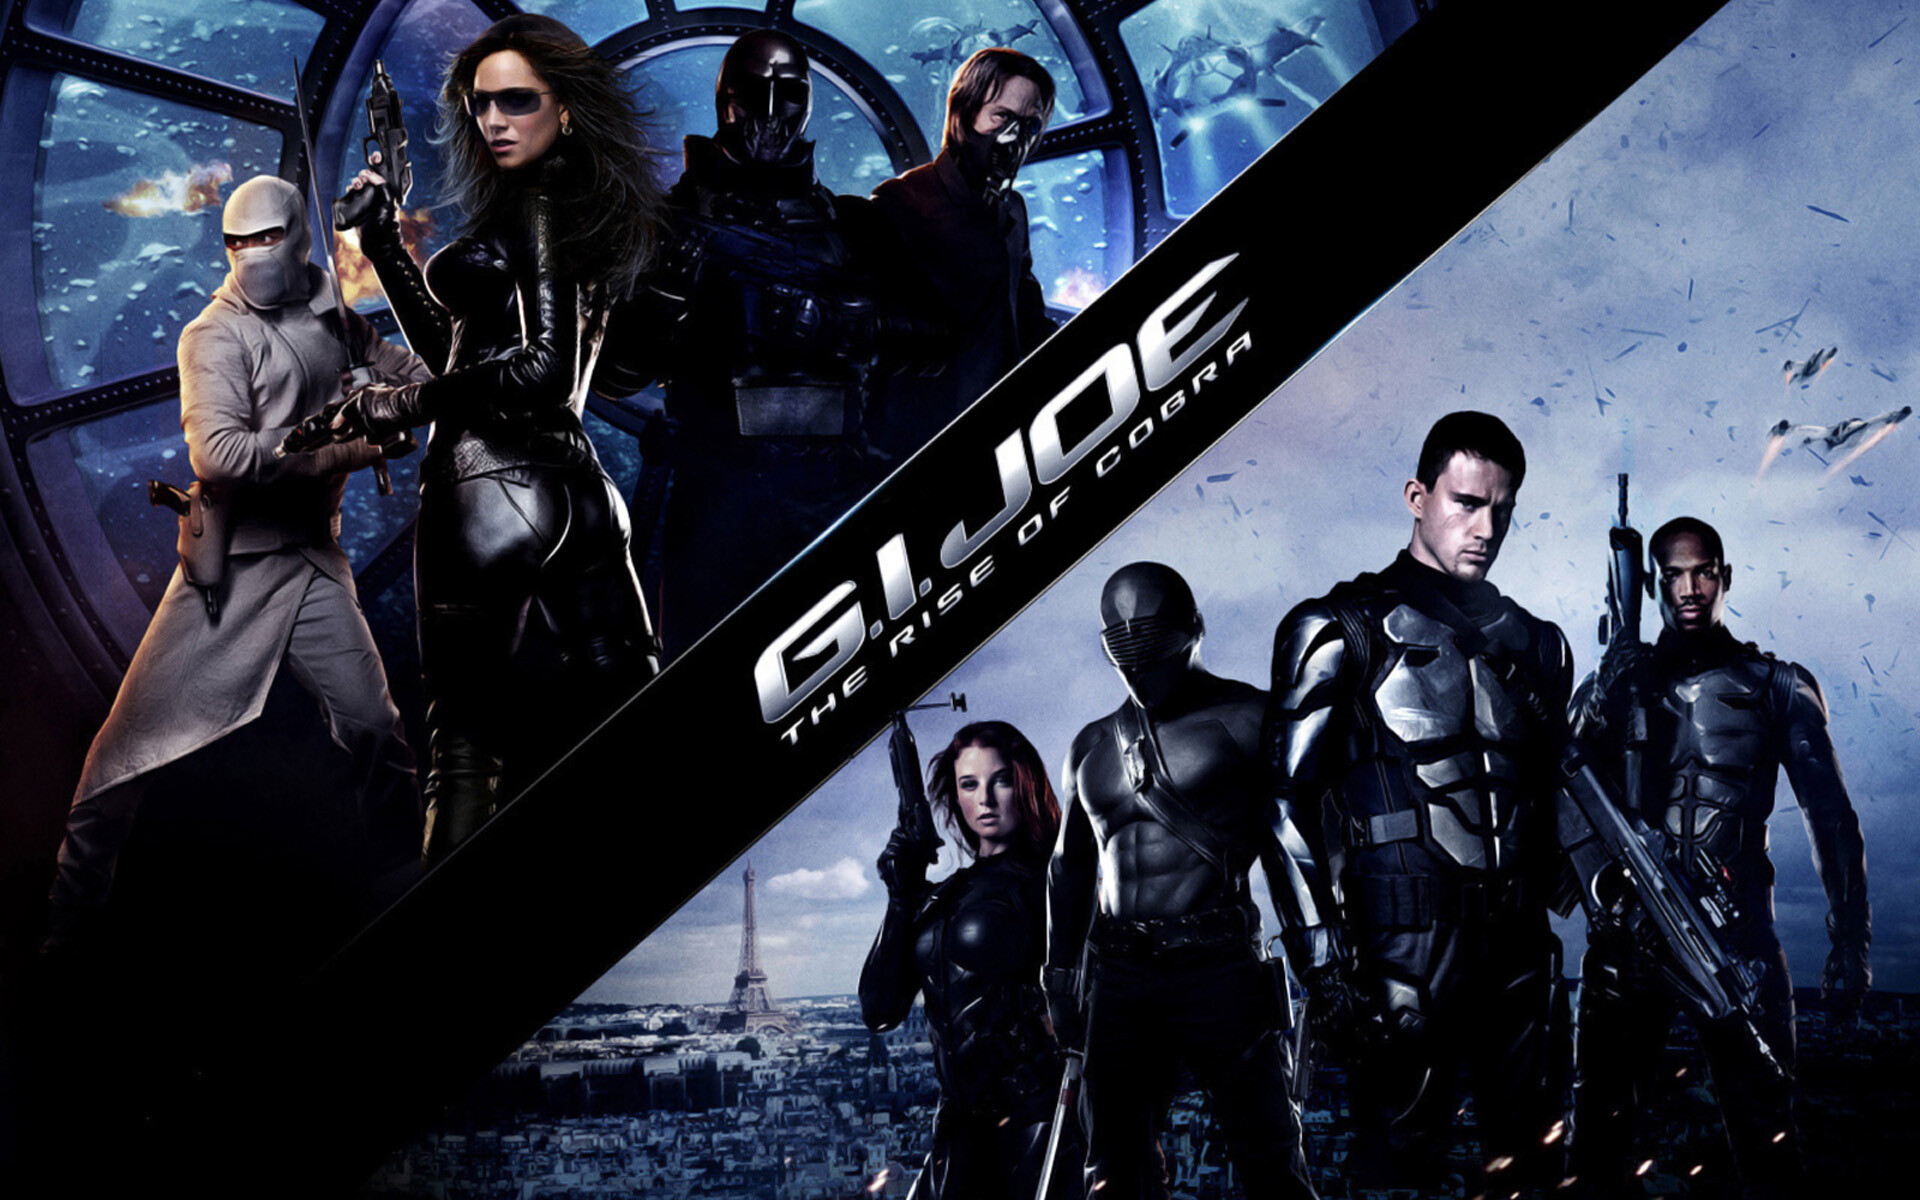 G.I. Joe (Movie): Cast, Military Armaments Research Syndicate, Antiterroristic Organisation Of Superheroes, The First Film In The Series. 1920x1200 HD Wallpaper.